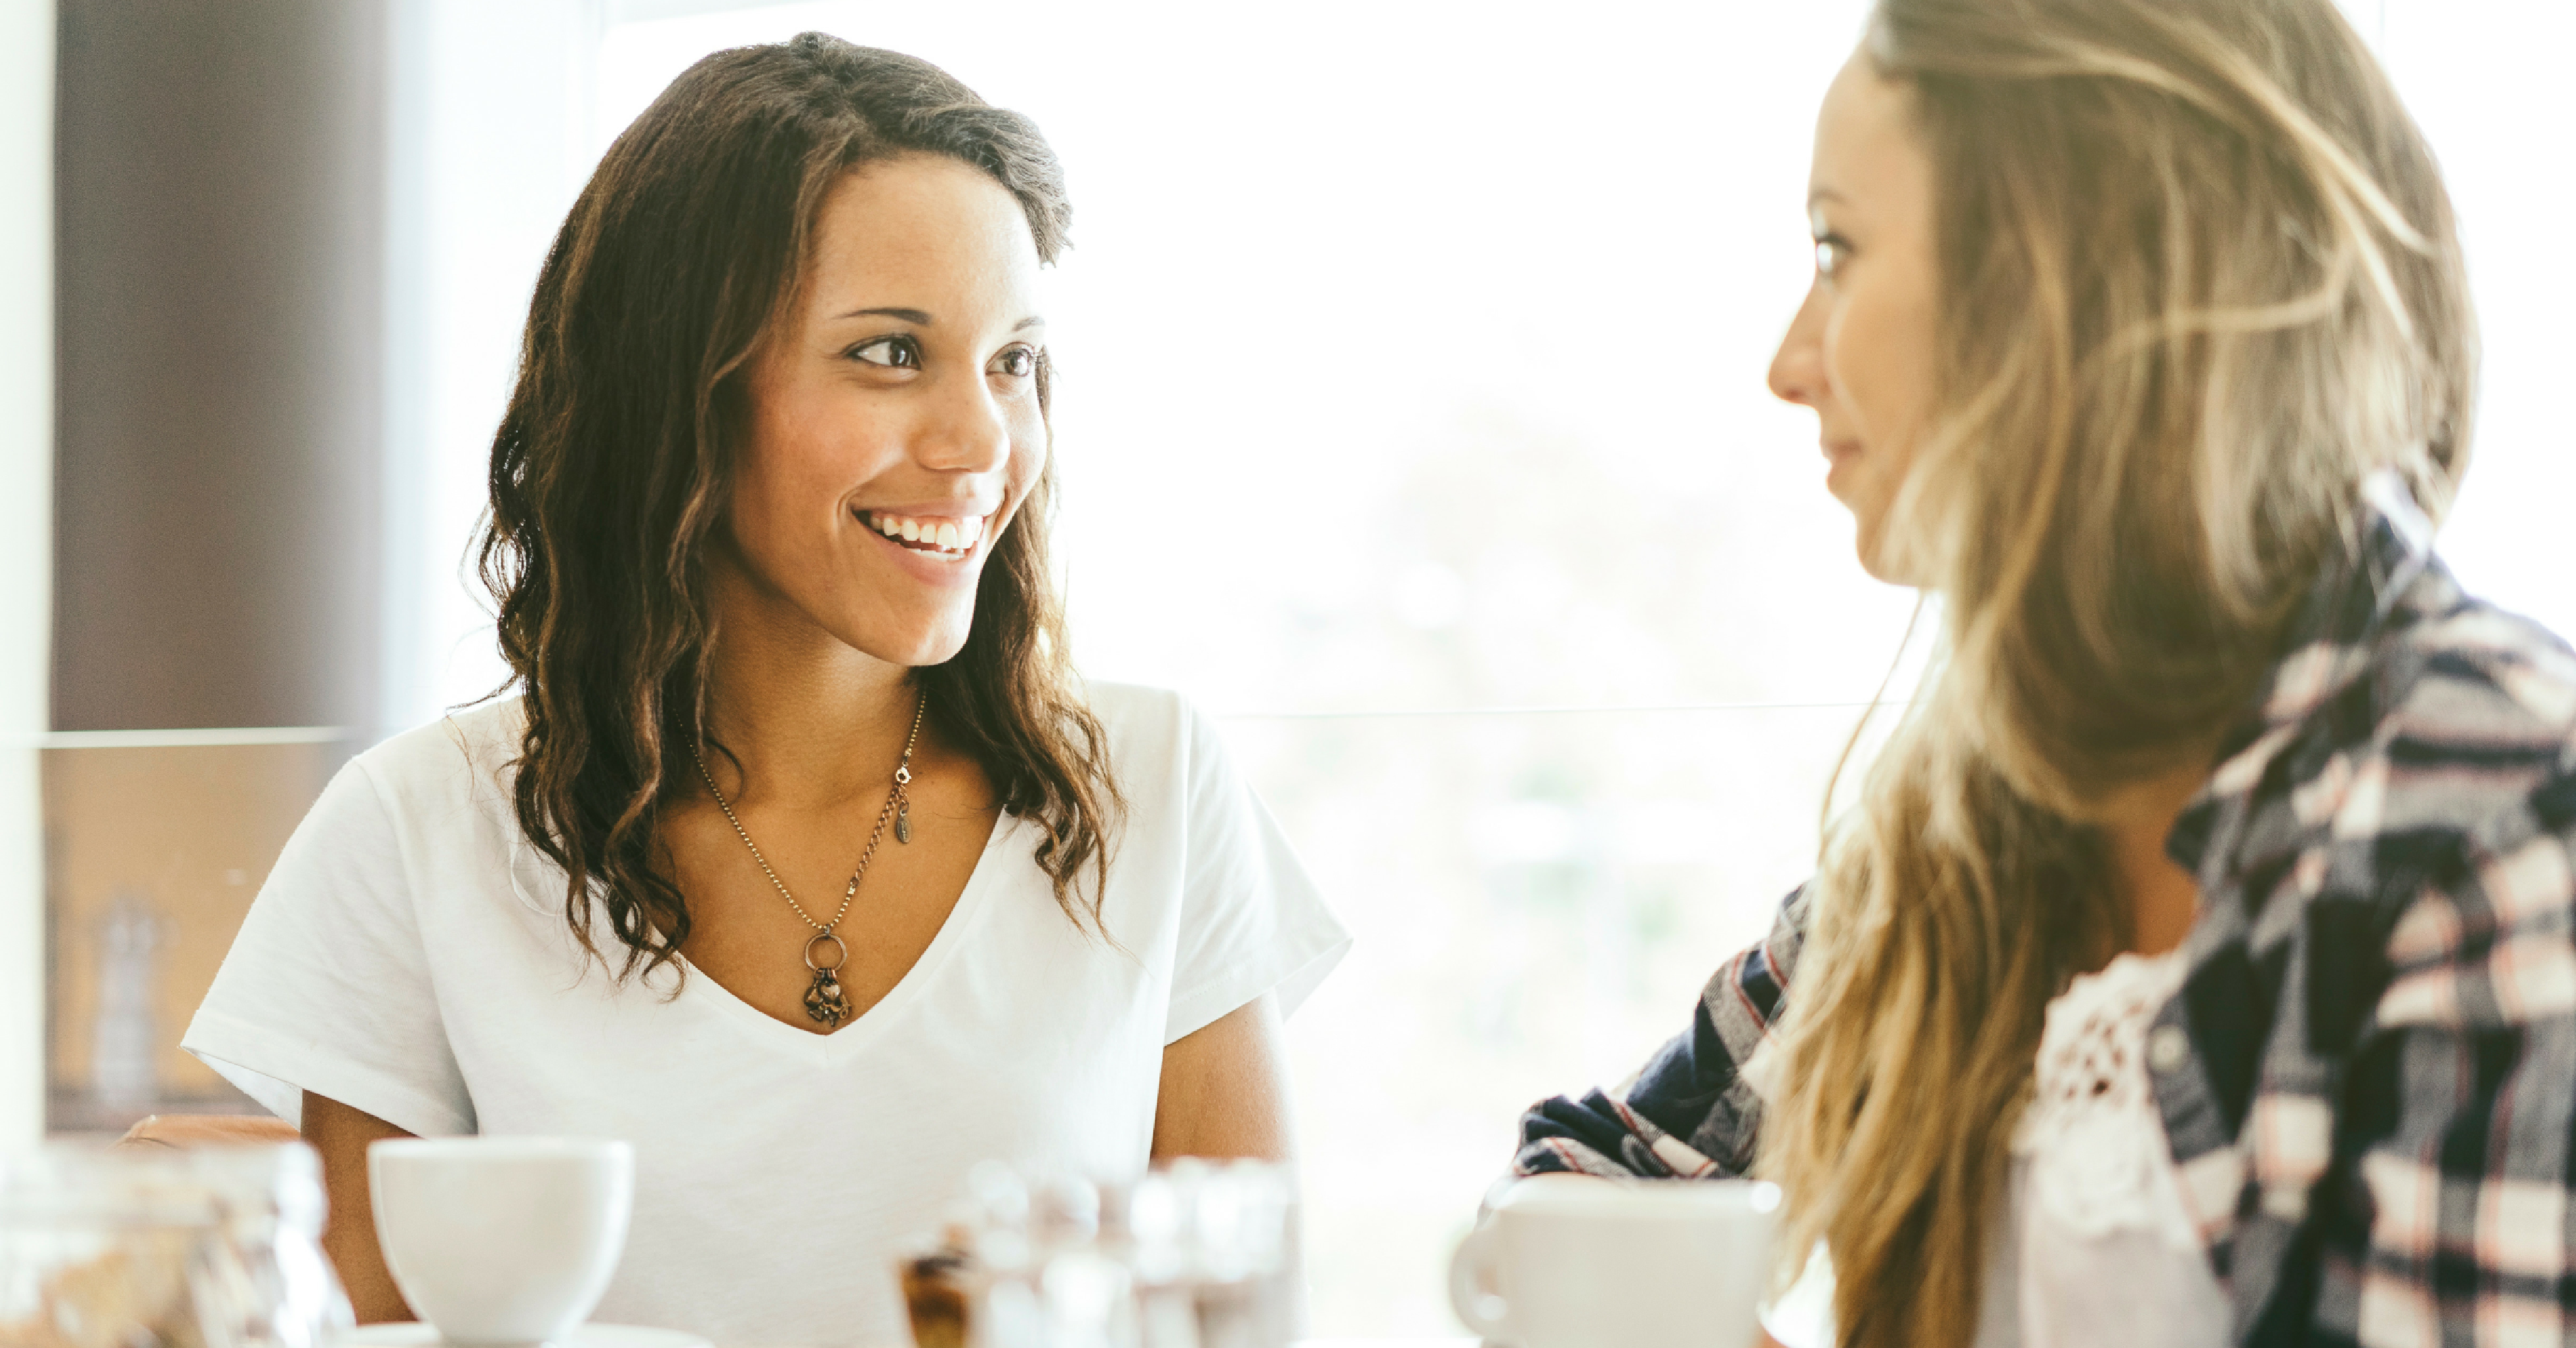 How do we connect with others beyond fleeting encounters? These 3 tips from the Sparkle Circle will help you build relationship connections on a deeper level. 